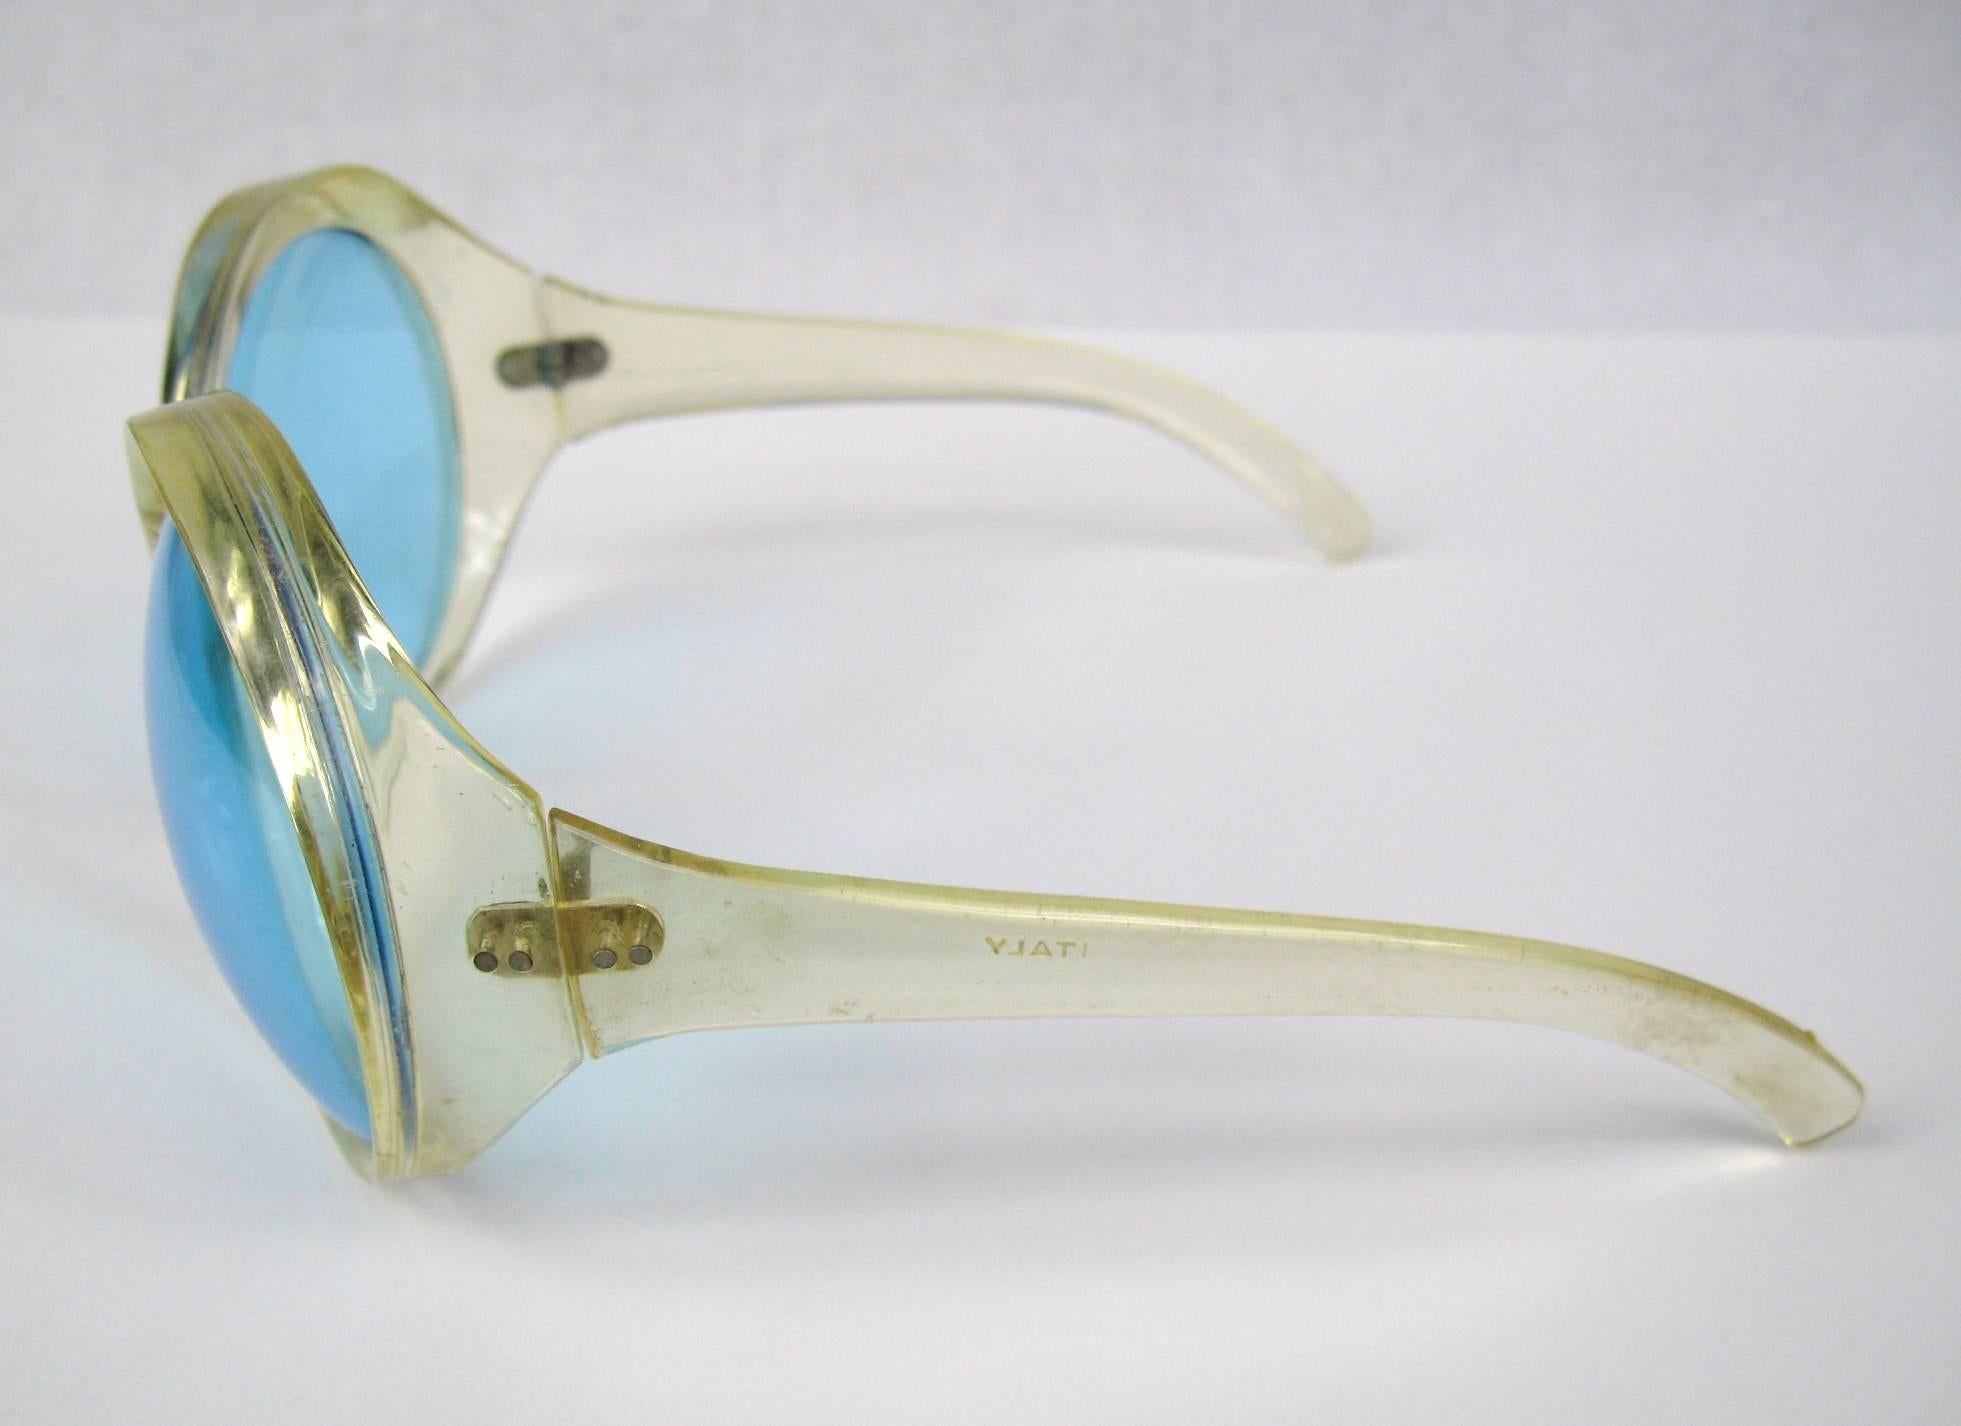 Stunningly large, Clear frame, bug-eye sunglasses Blue lenses Oh so Bridget Bardot from the 1960s. Made in Italy. Excellent vintage condition. Measuring 3.20 x 2.80 top to bottom. Be sure to check our storefront for more fabulous pieces from this